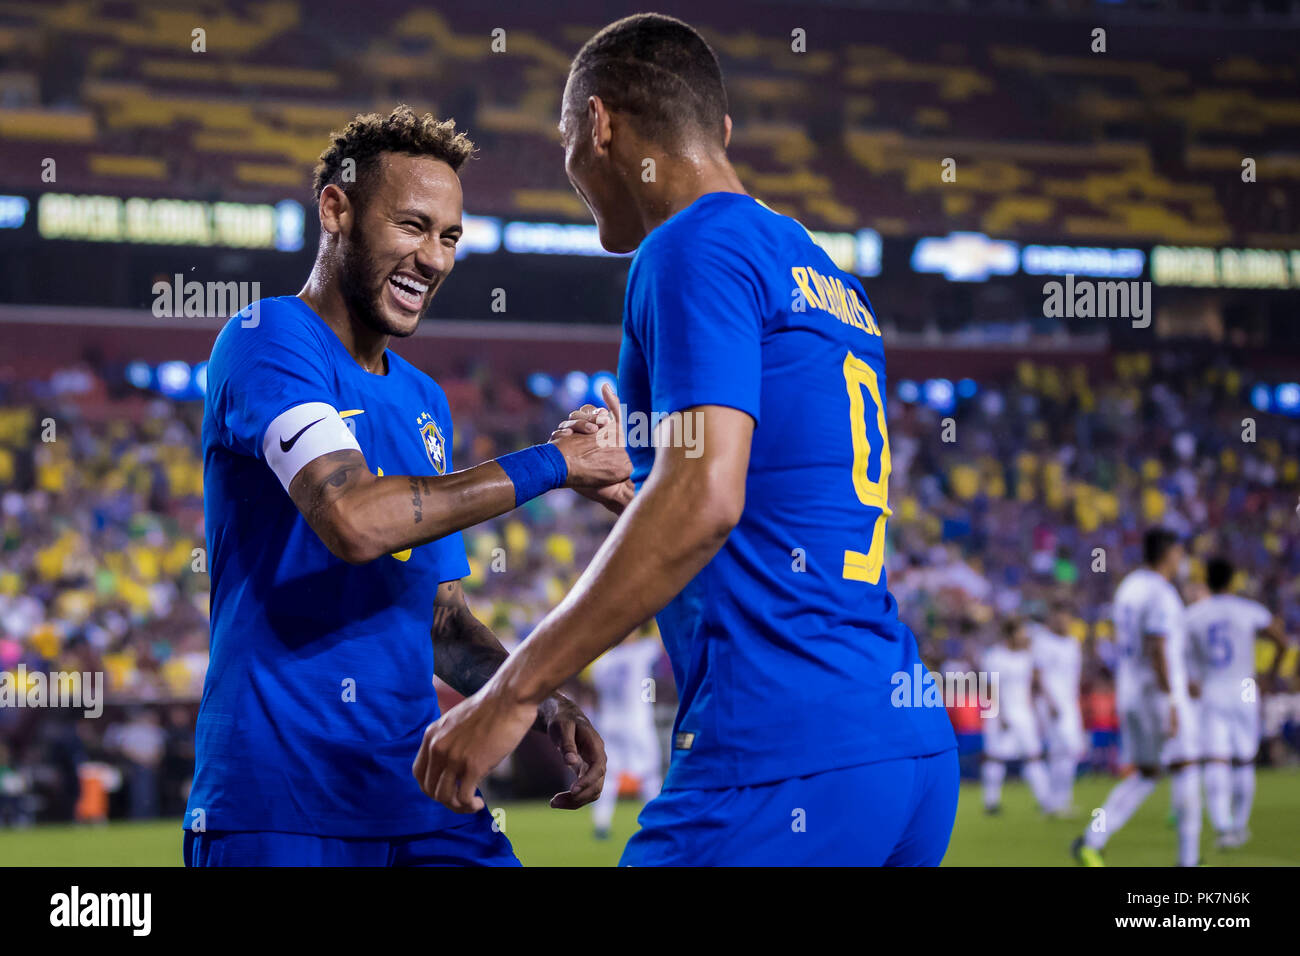 Landover, Maryland, USA. 11th Sep, 2018. Brazil forward Richarlison (9) celebrates with forward Neymar (10) after scoring during the first half of an International Friendly match between Brazil and El Salvador at FedExField in Landover, Maryland. Scott Taetsch/CSM/Alamy Live News Stock Photo